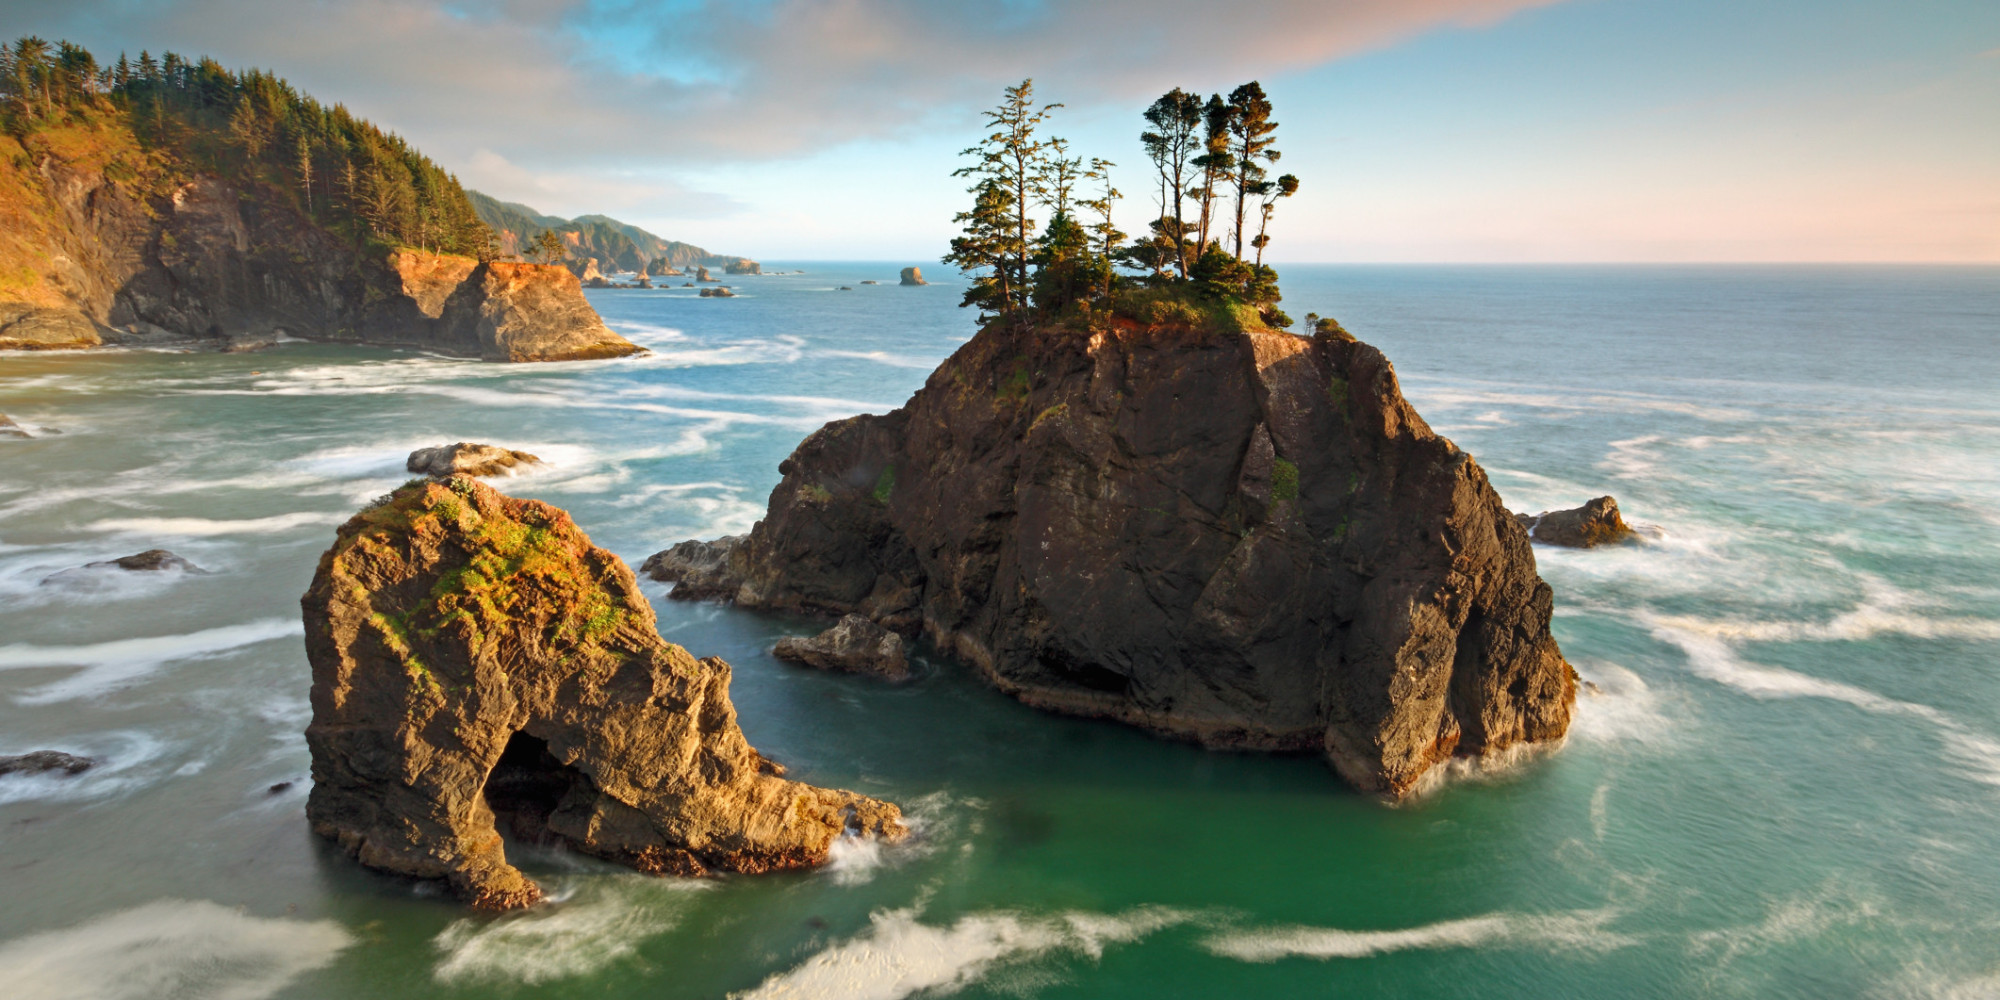 This Secret Slice Of Oregon Coast Is The Most Beautiful Place You've